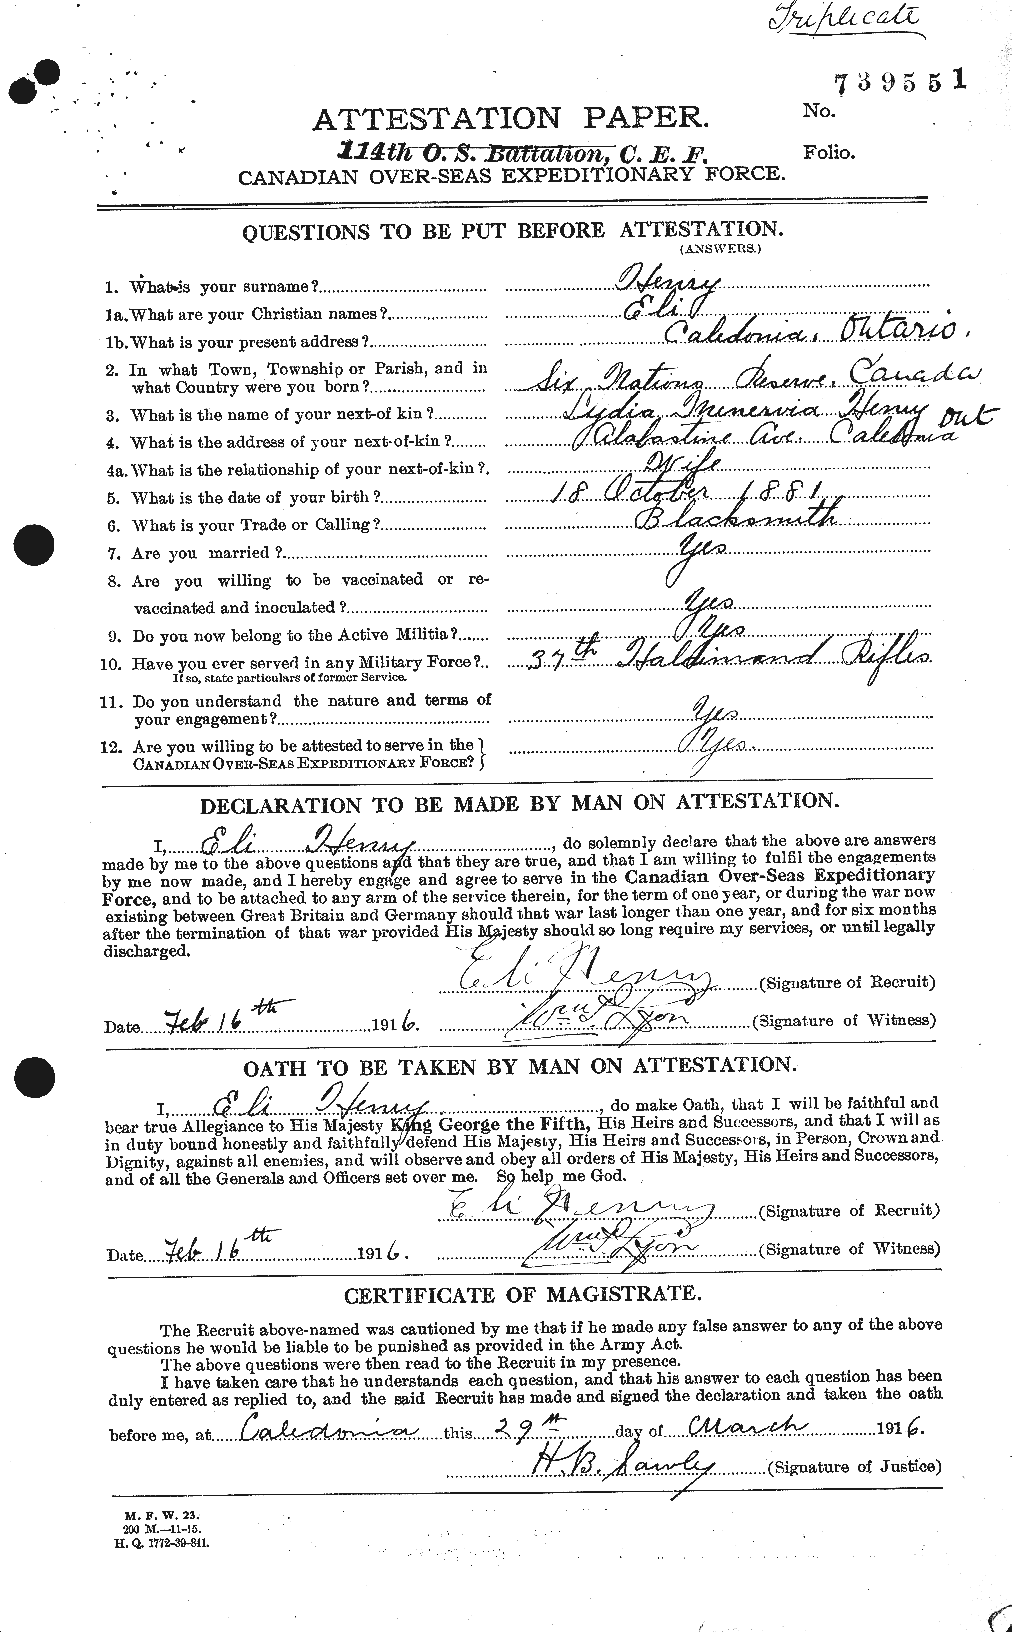 Personnel Records of the First World War - CEF 392842a